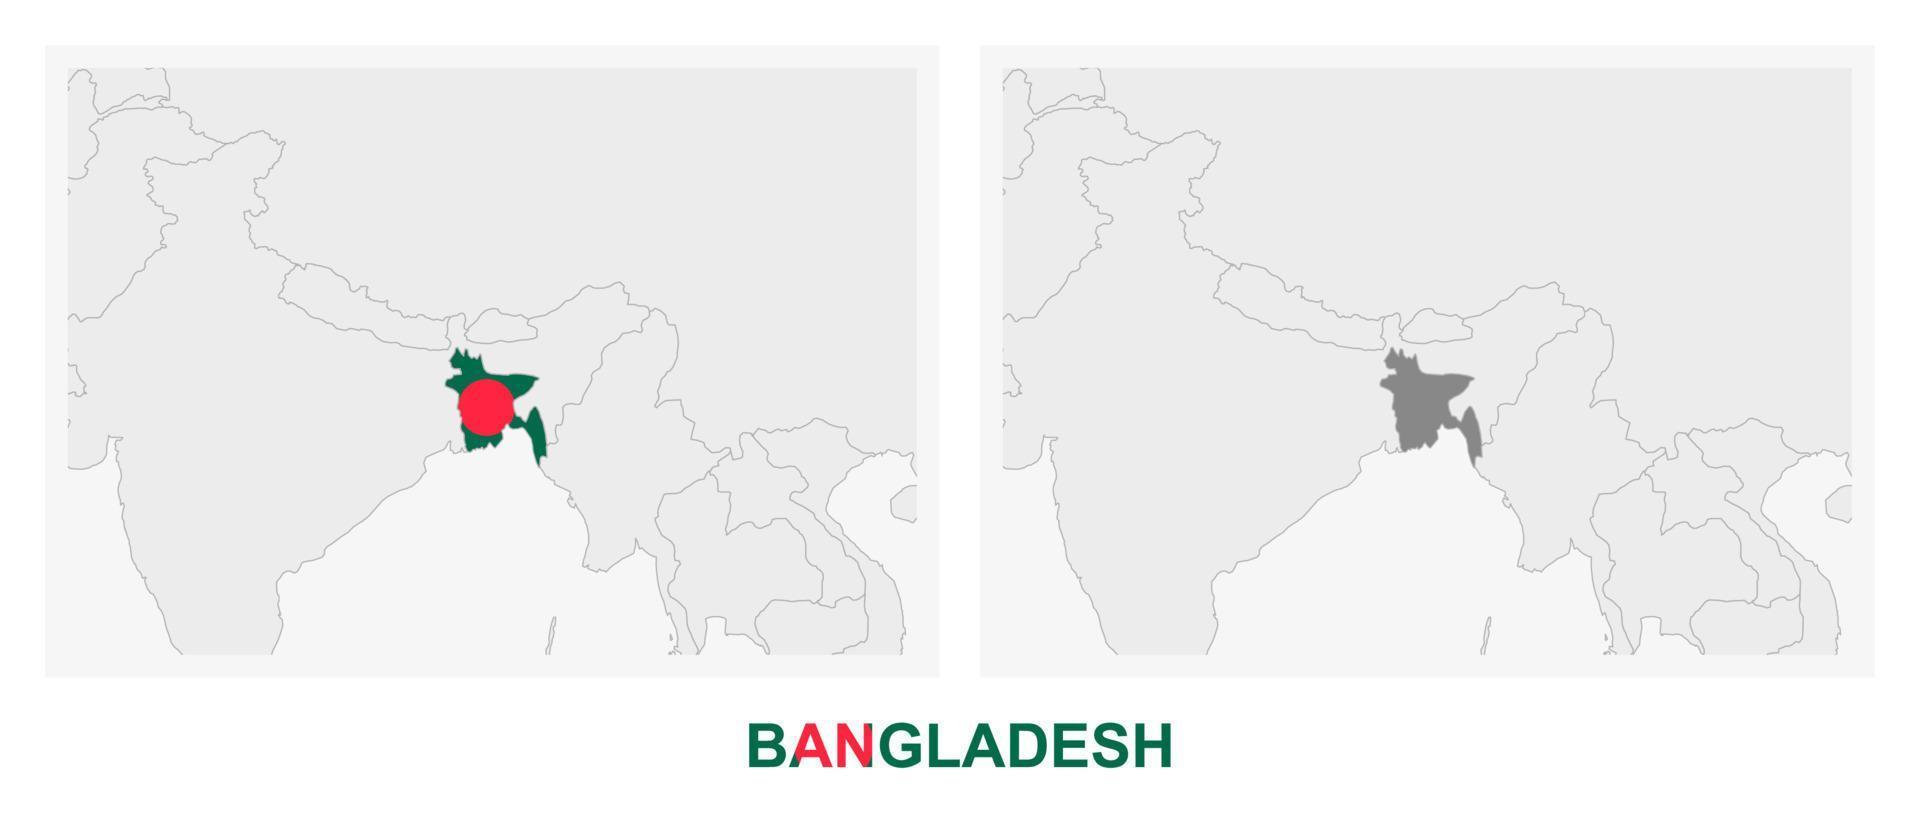 Two versions of the map of Bangladesh, with the flag of Bangladesh and highlighted in dark grey. vector